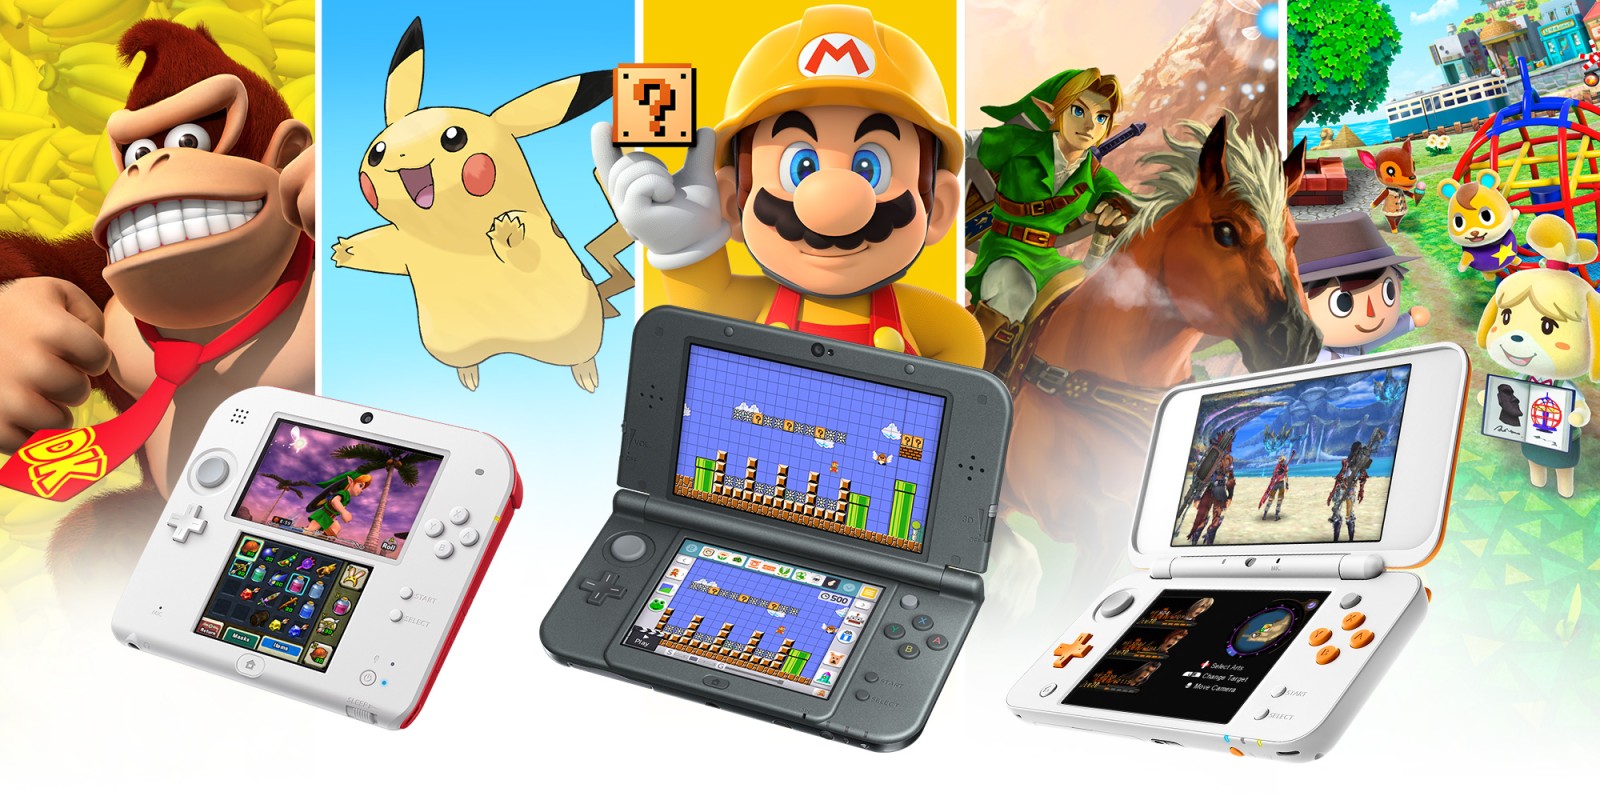 Nintendo Announces Discontinuation Of Online Services For 3DS And Wii U. What It Really Mean